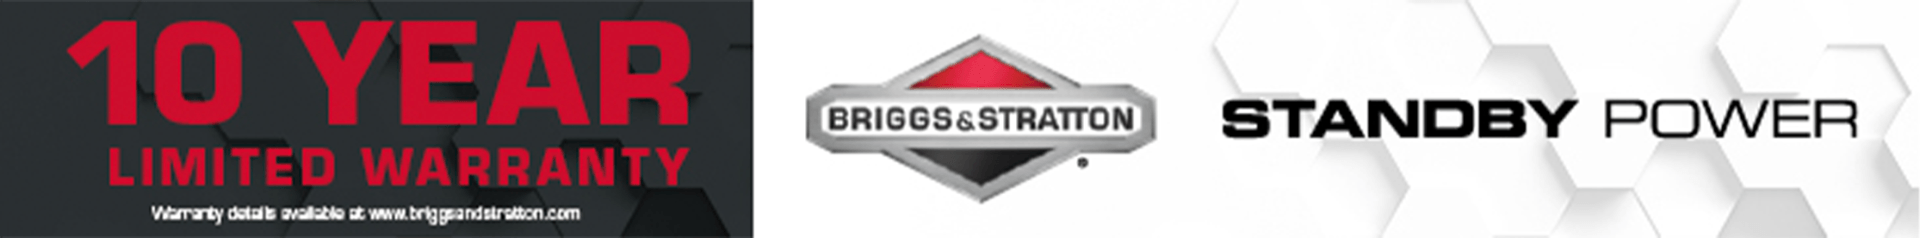 With GenSpring Power Inc., You Get a 10 Year Limited Warranty on Briggs & Stratton Generators in GA